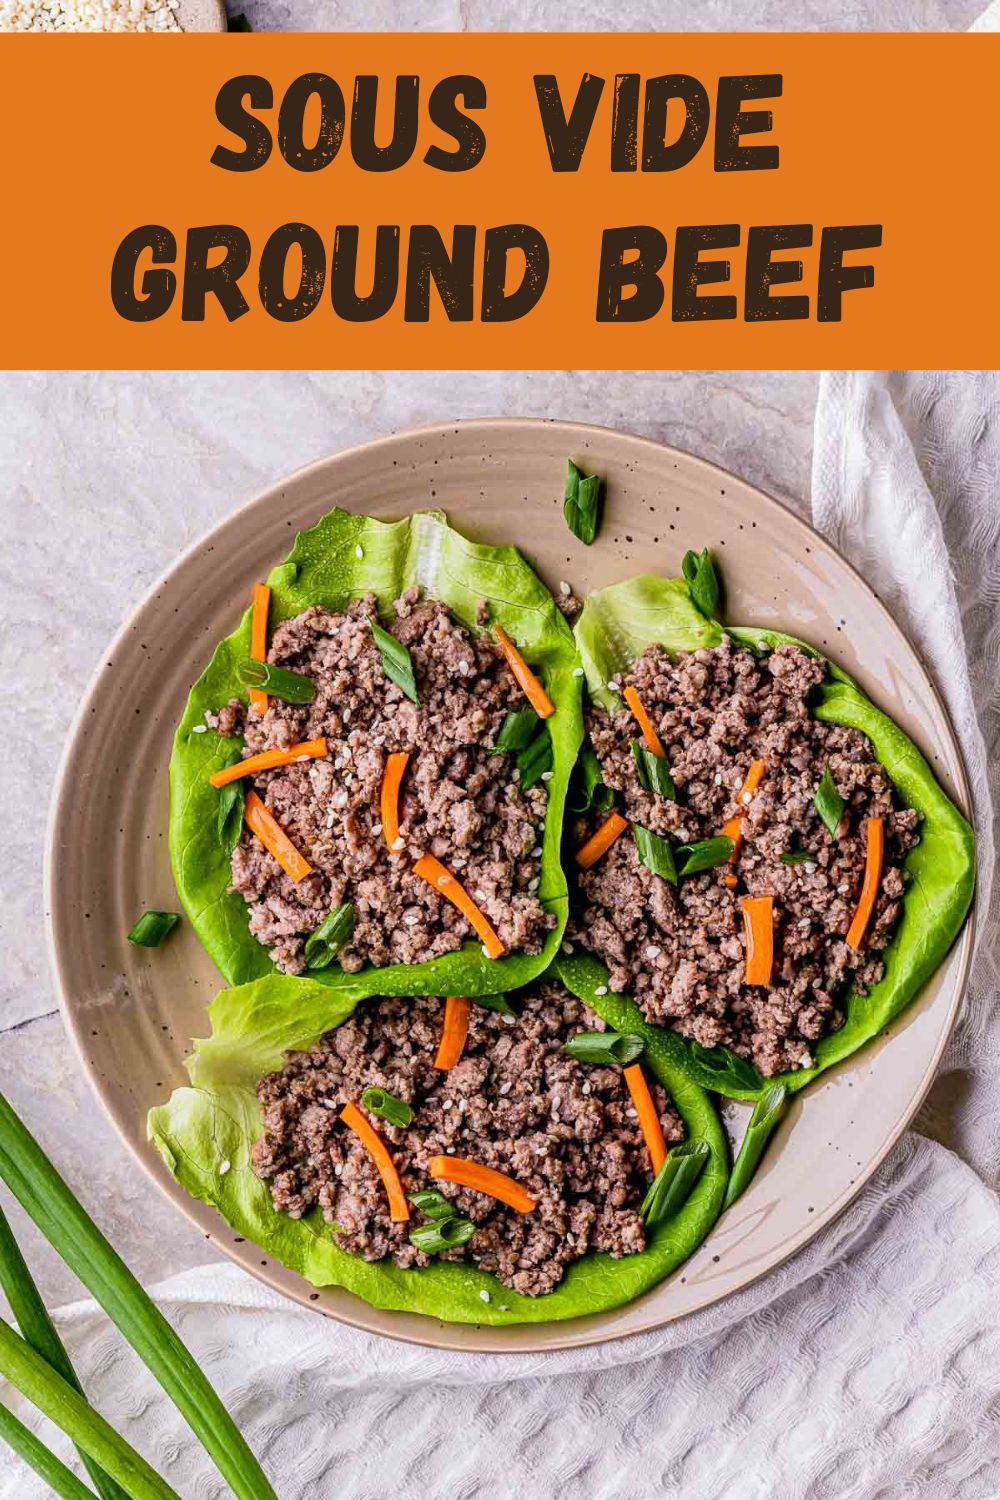 Sous Vide Ground Beef